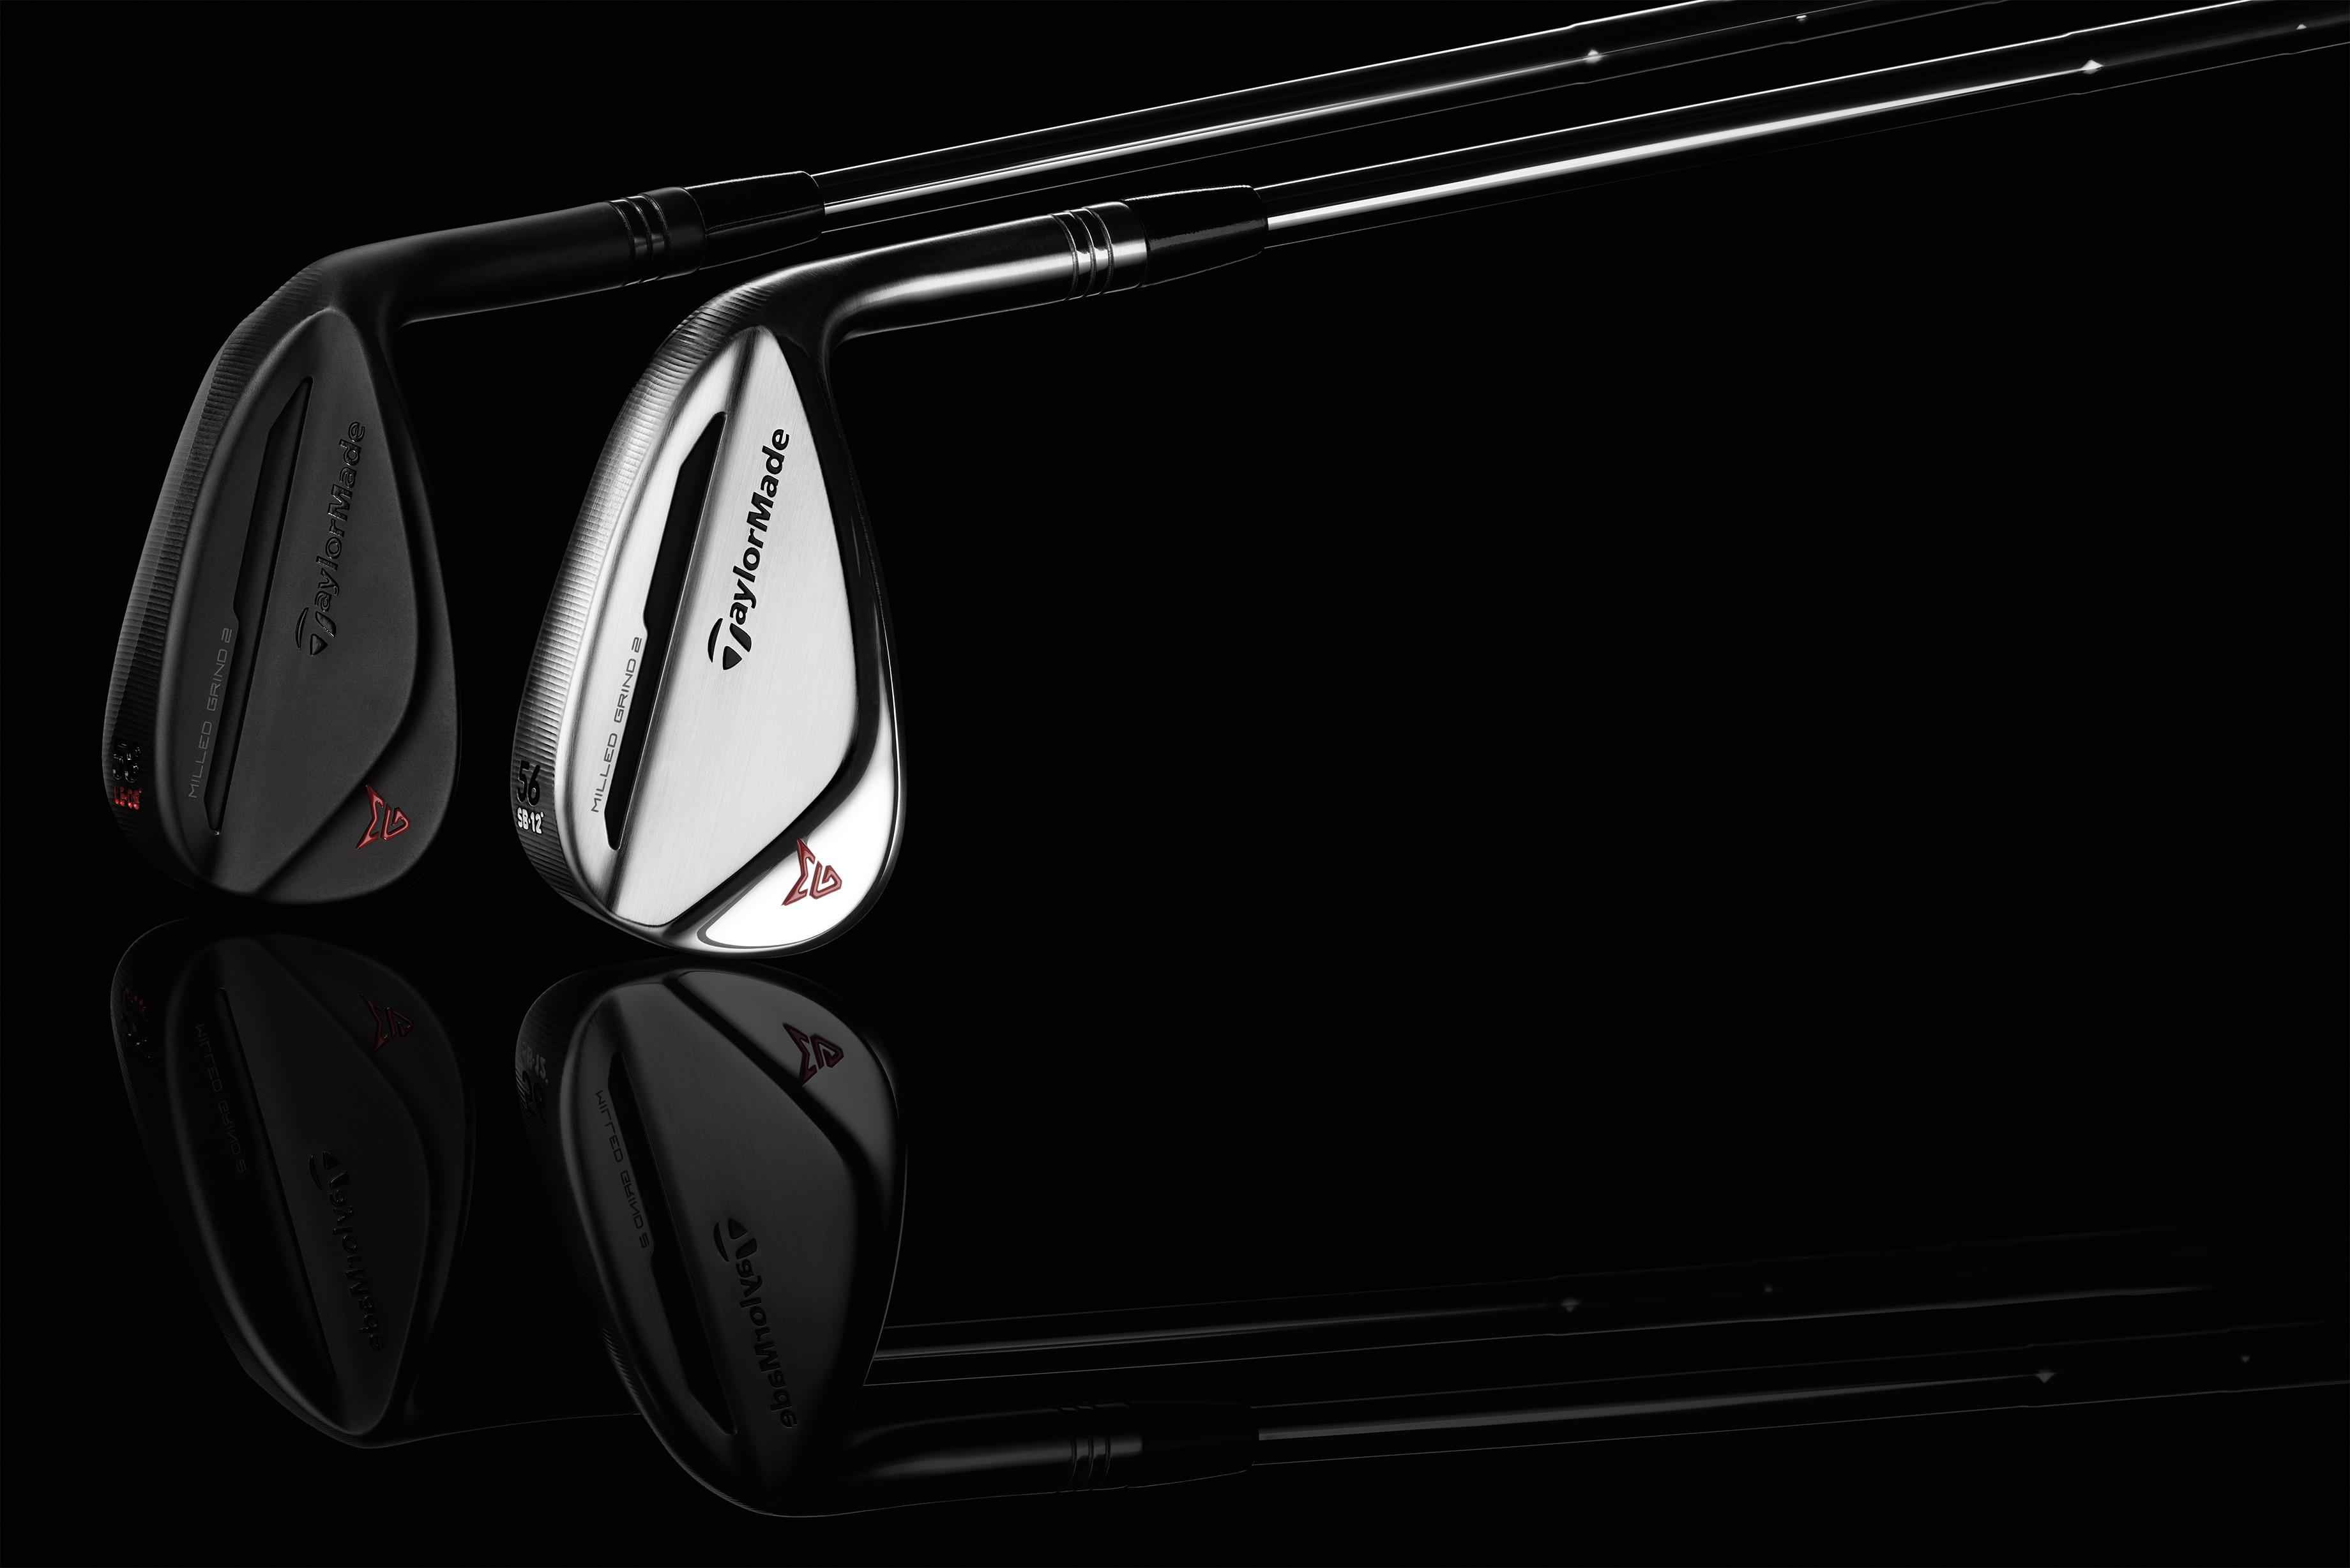 TaylorMade's Milled Grind 2 wedges offer precision, spin and a new 